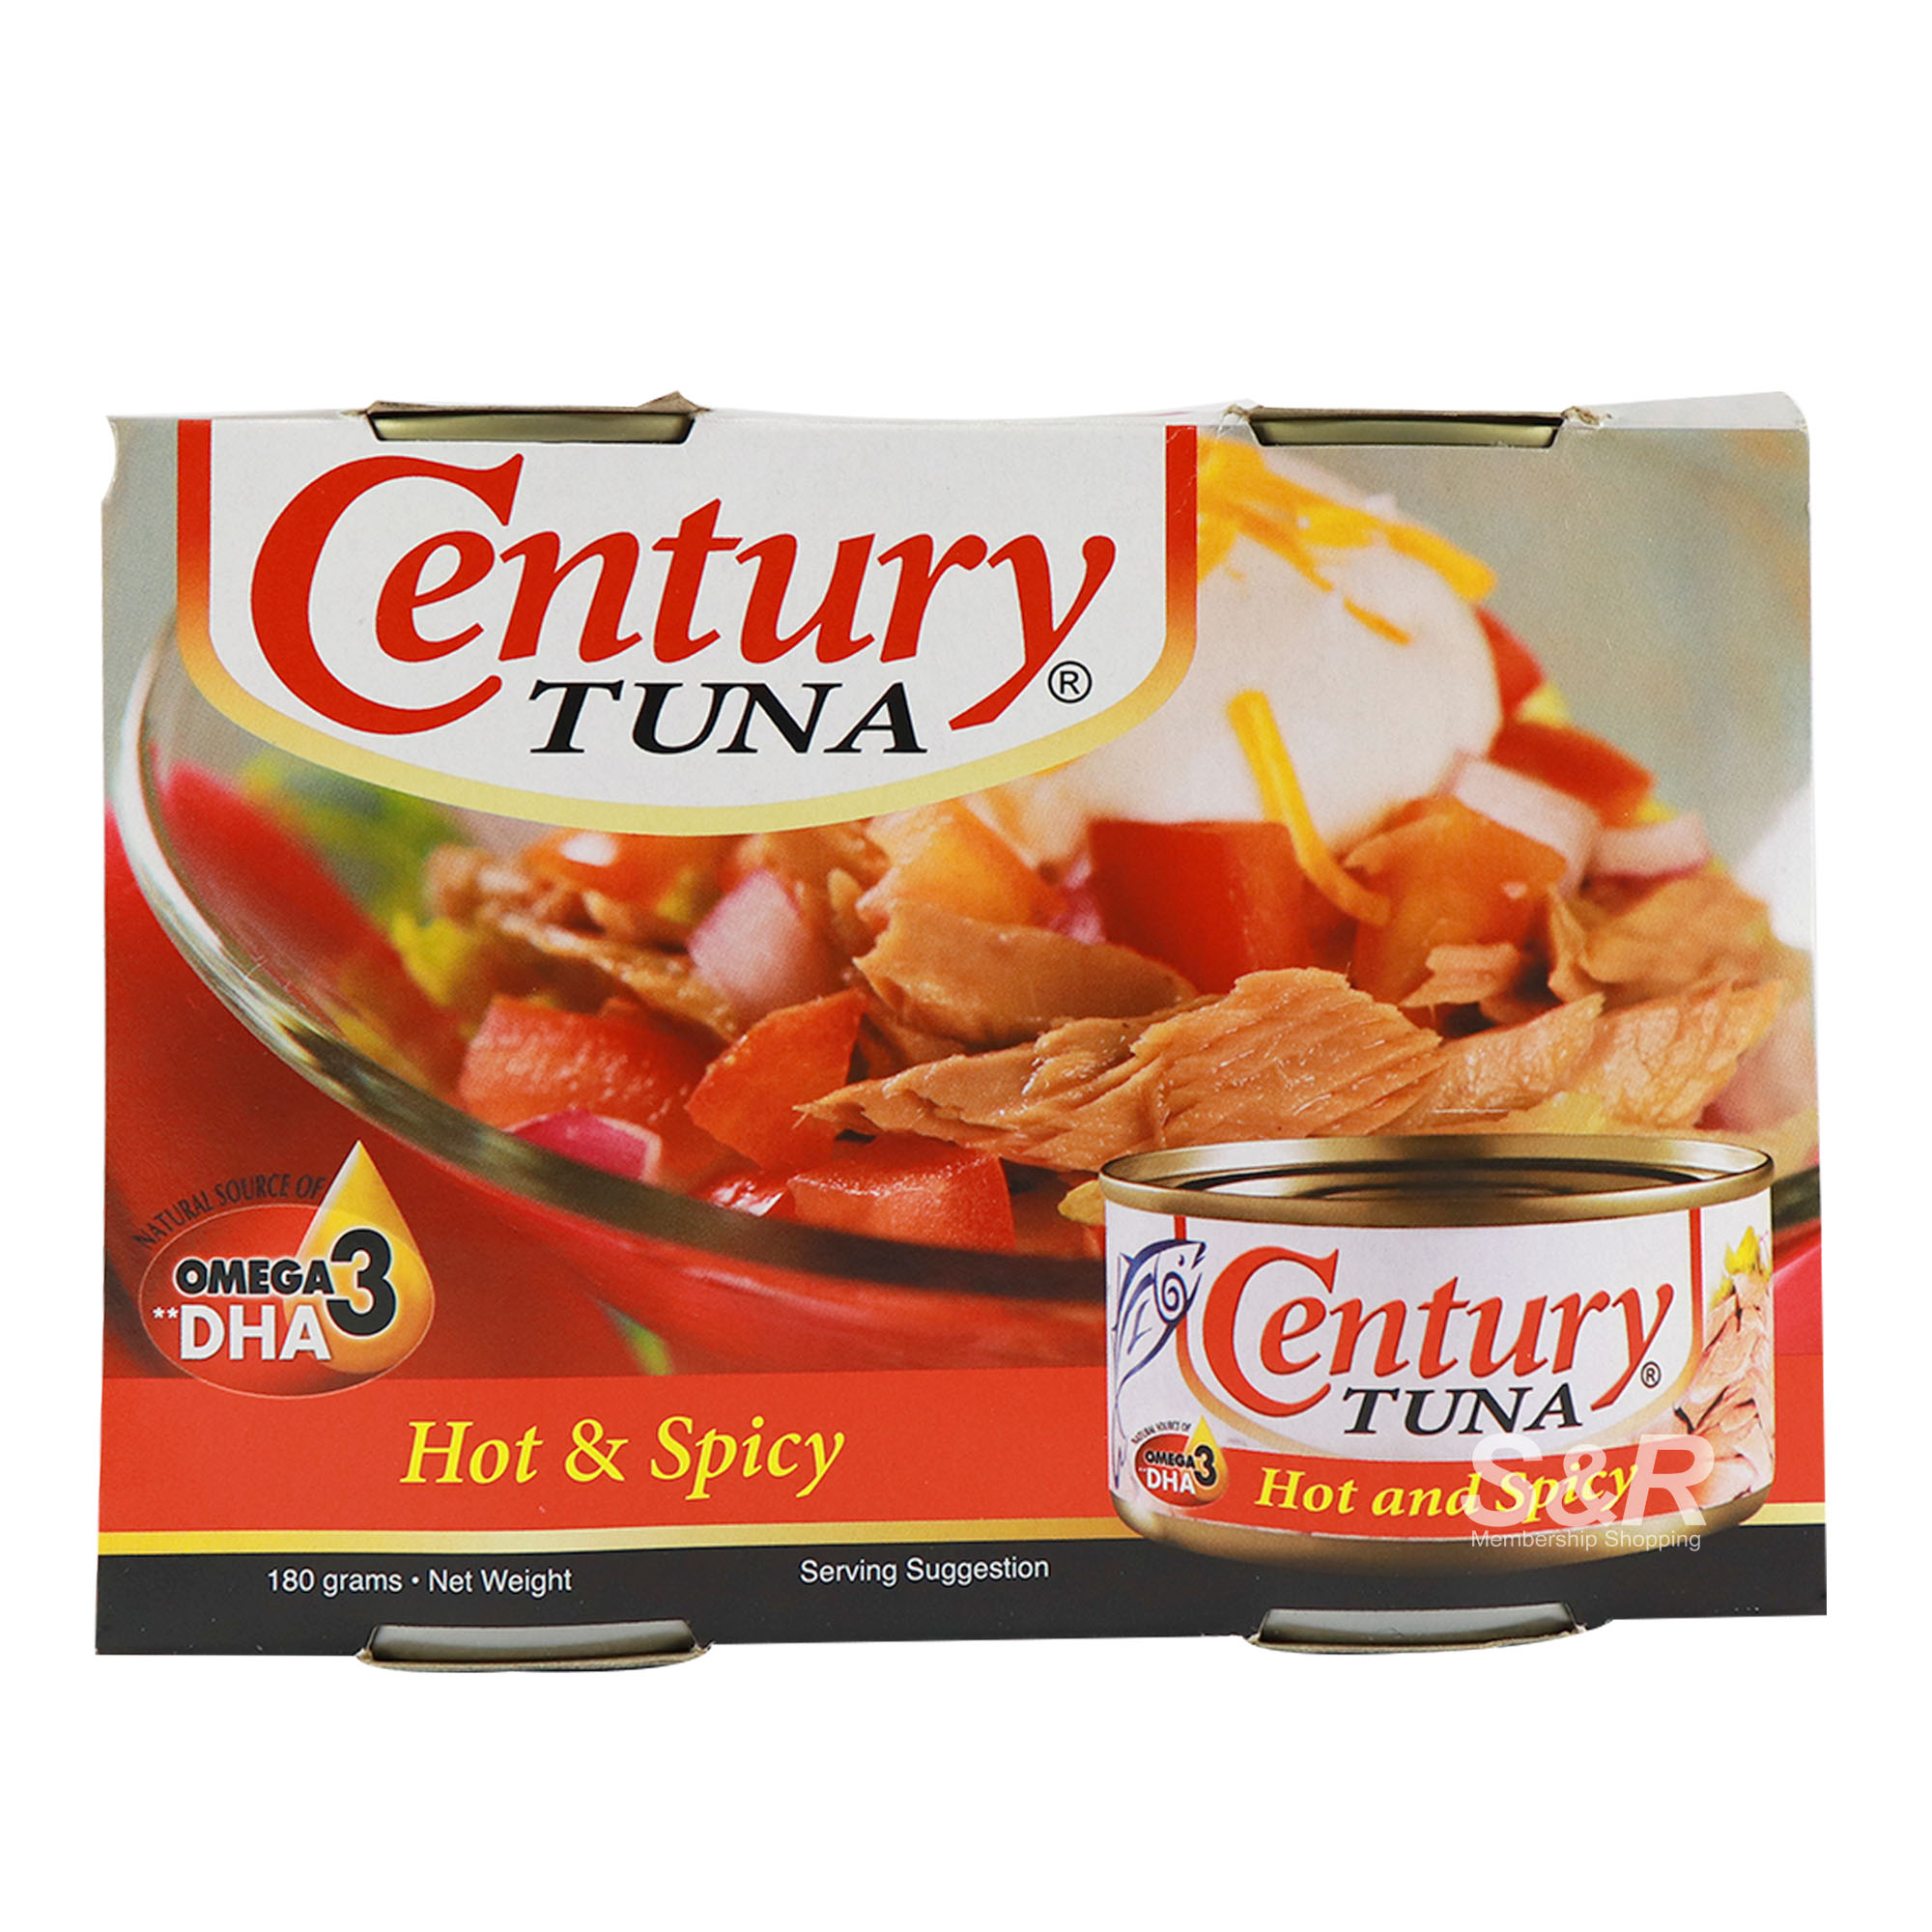 Century Tuna Hot and Spicy 6 cans